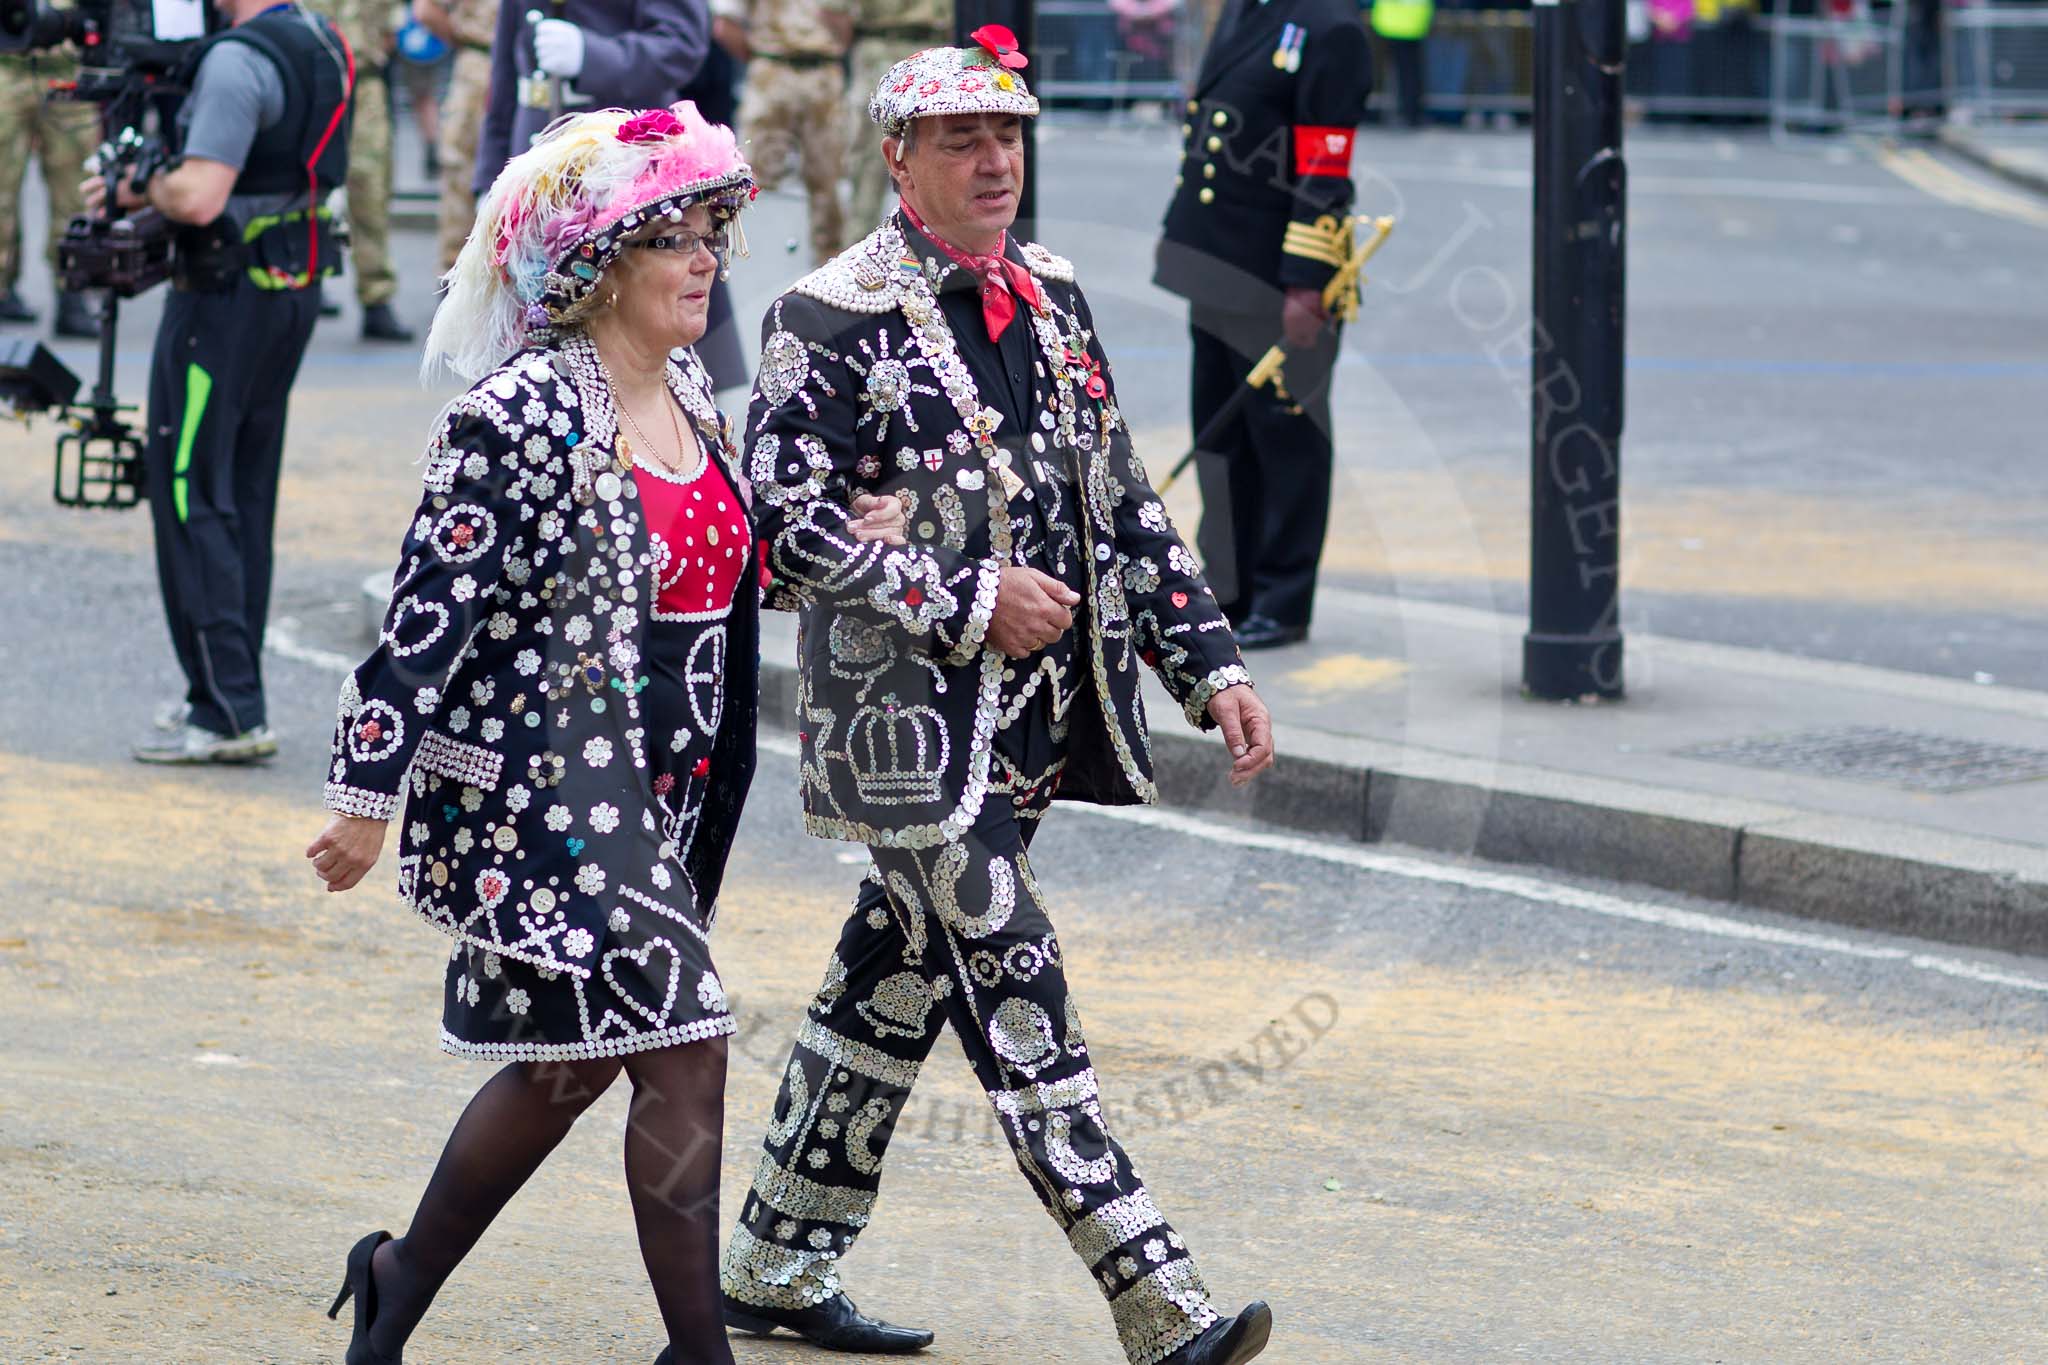 The Lord Mayor's Show 2011: Canary Wharf (http://www.canarywharf.com/):
The Pearly King and Queen of Tower Hamlets..
Opposite Mansion House, City of London,
London,
-,
United Kingdom,
on 12 November 2011 at 11:37, image #372